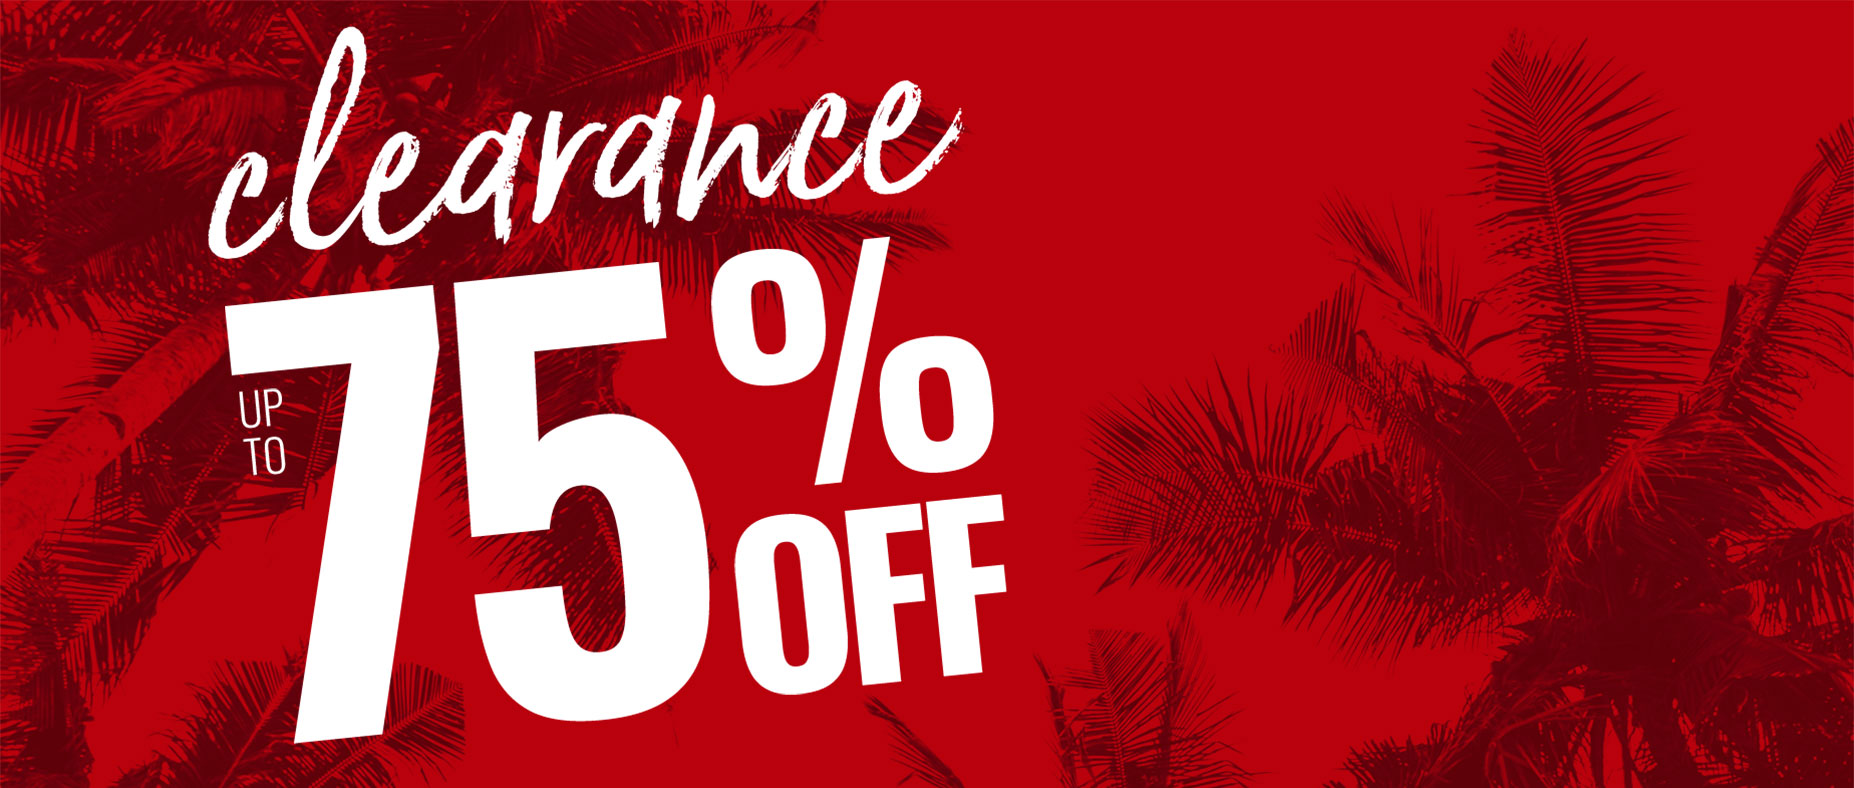 clearance up to 75% off